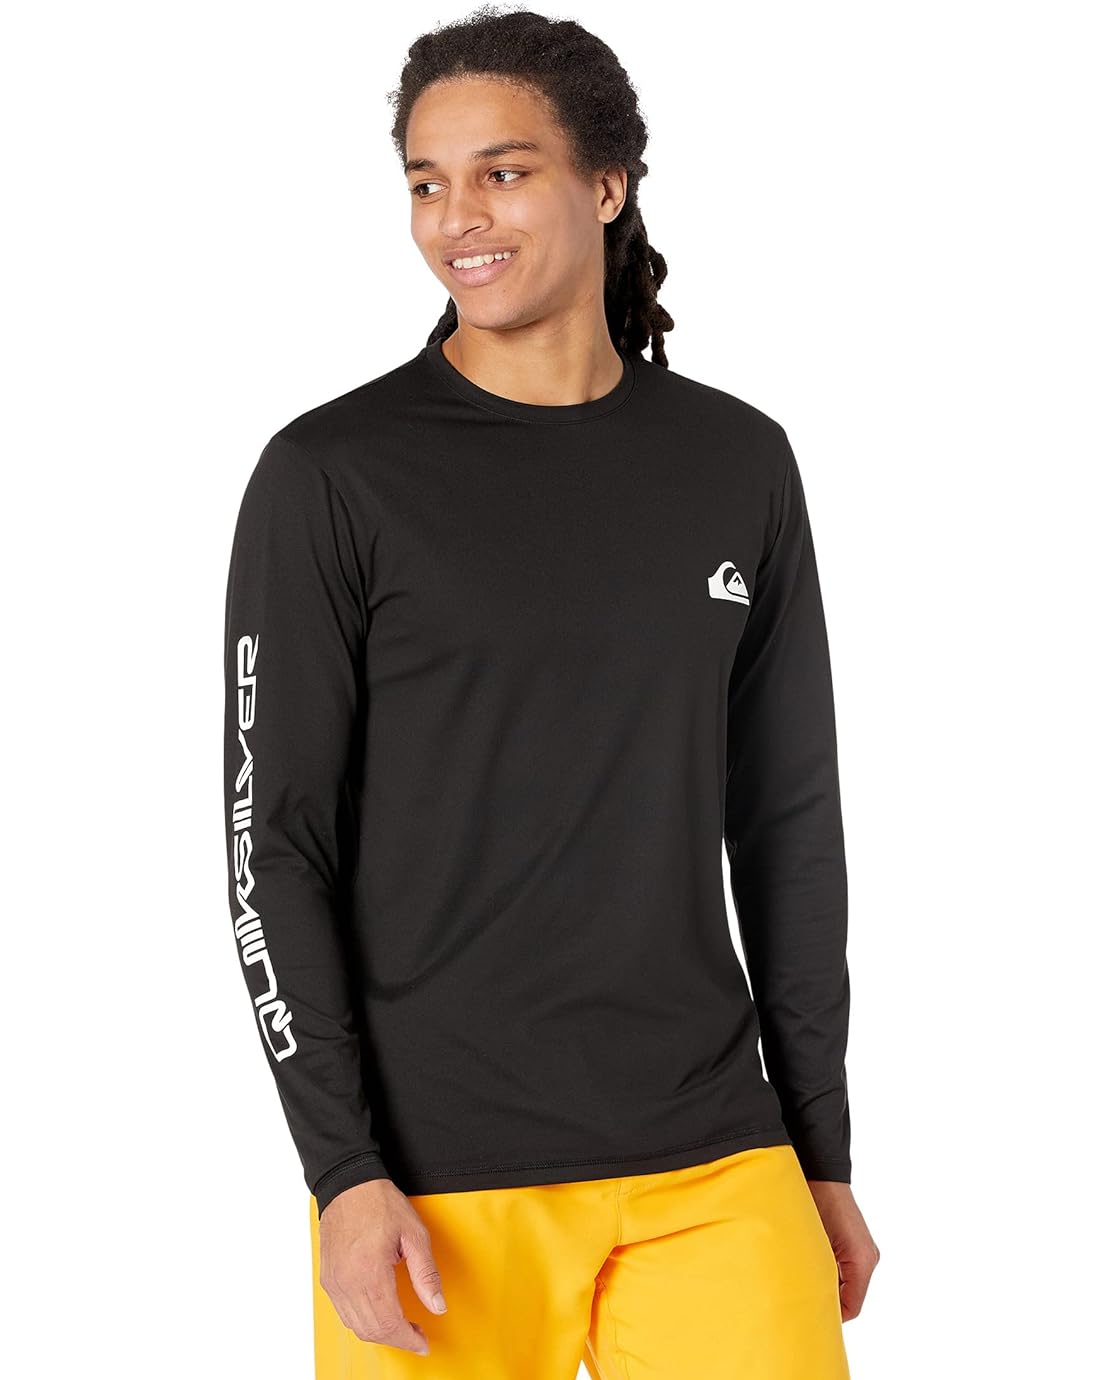 Quiksilver Omni Session Long Sleeve Surf Tee